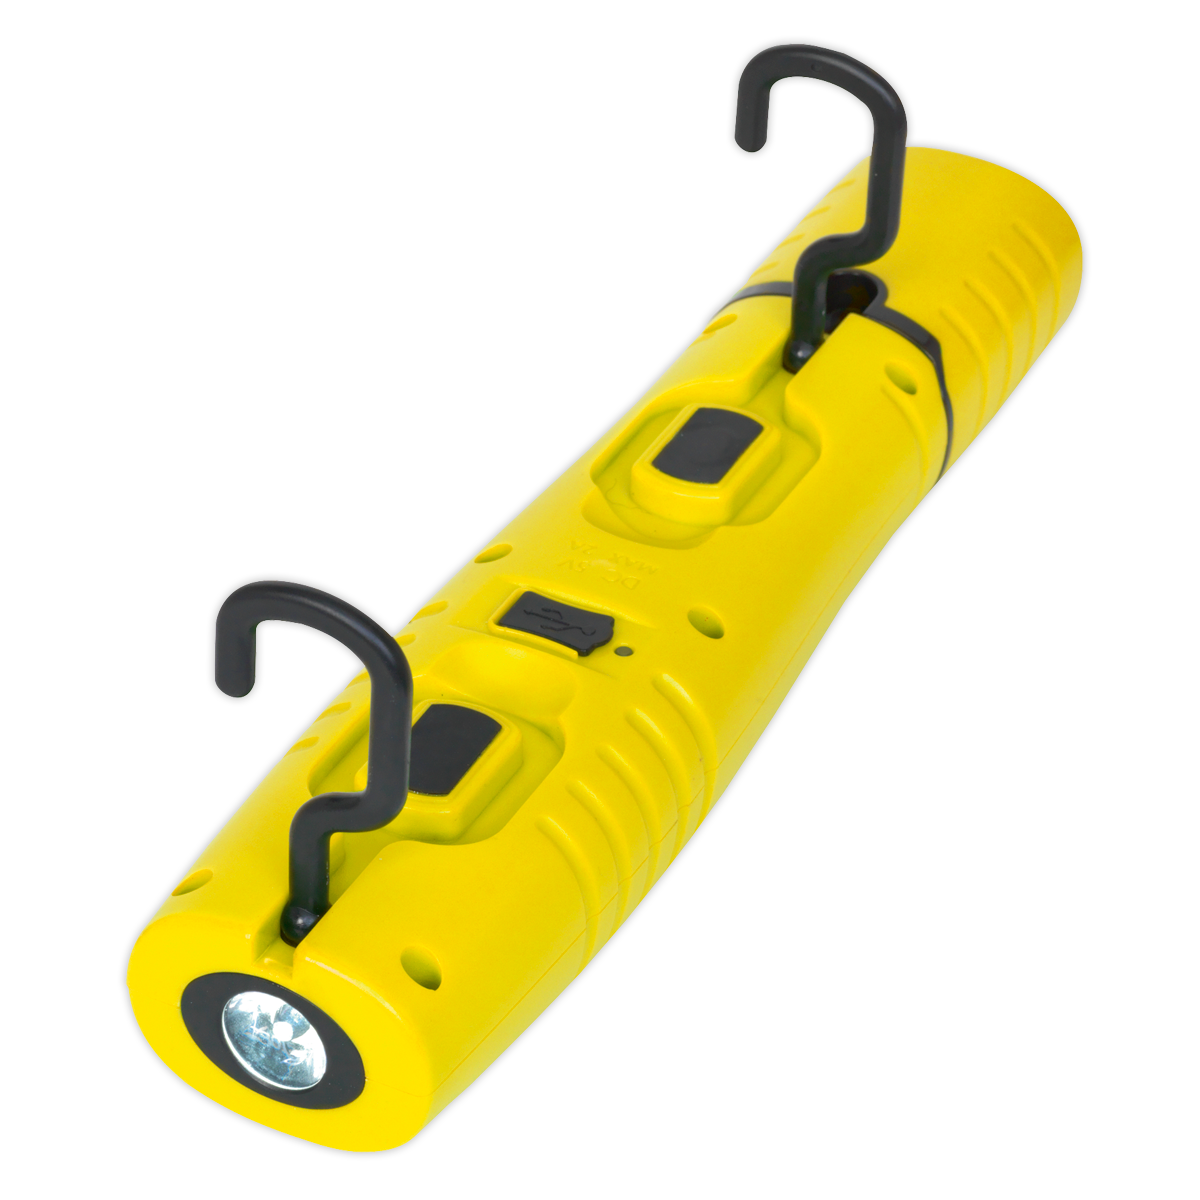 Rechargeable 360° Inspection Light 7 SMD & 3W SMD LED Yellow Lithium-ion - LED3602Y - Farming Parts